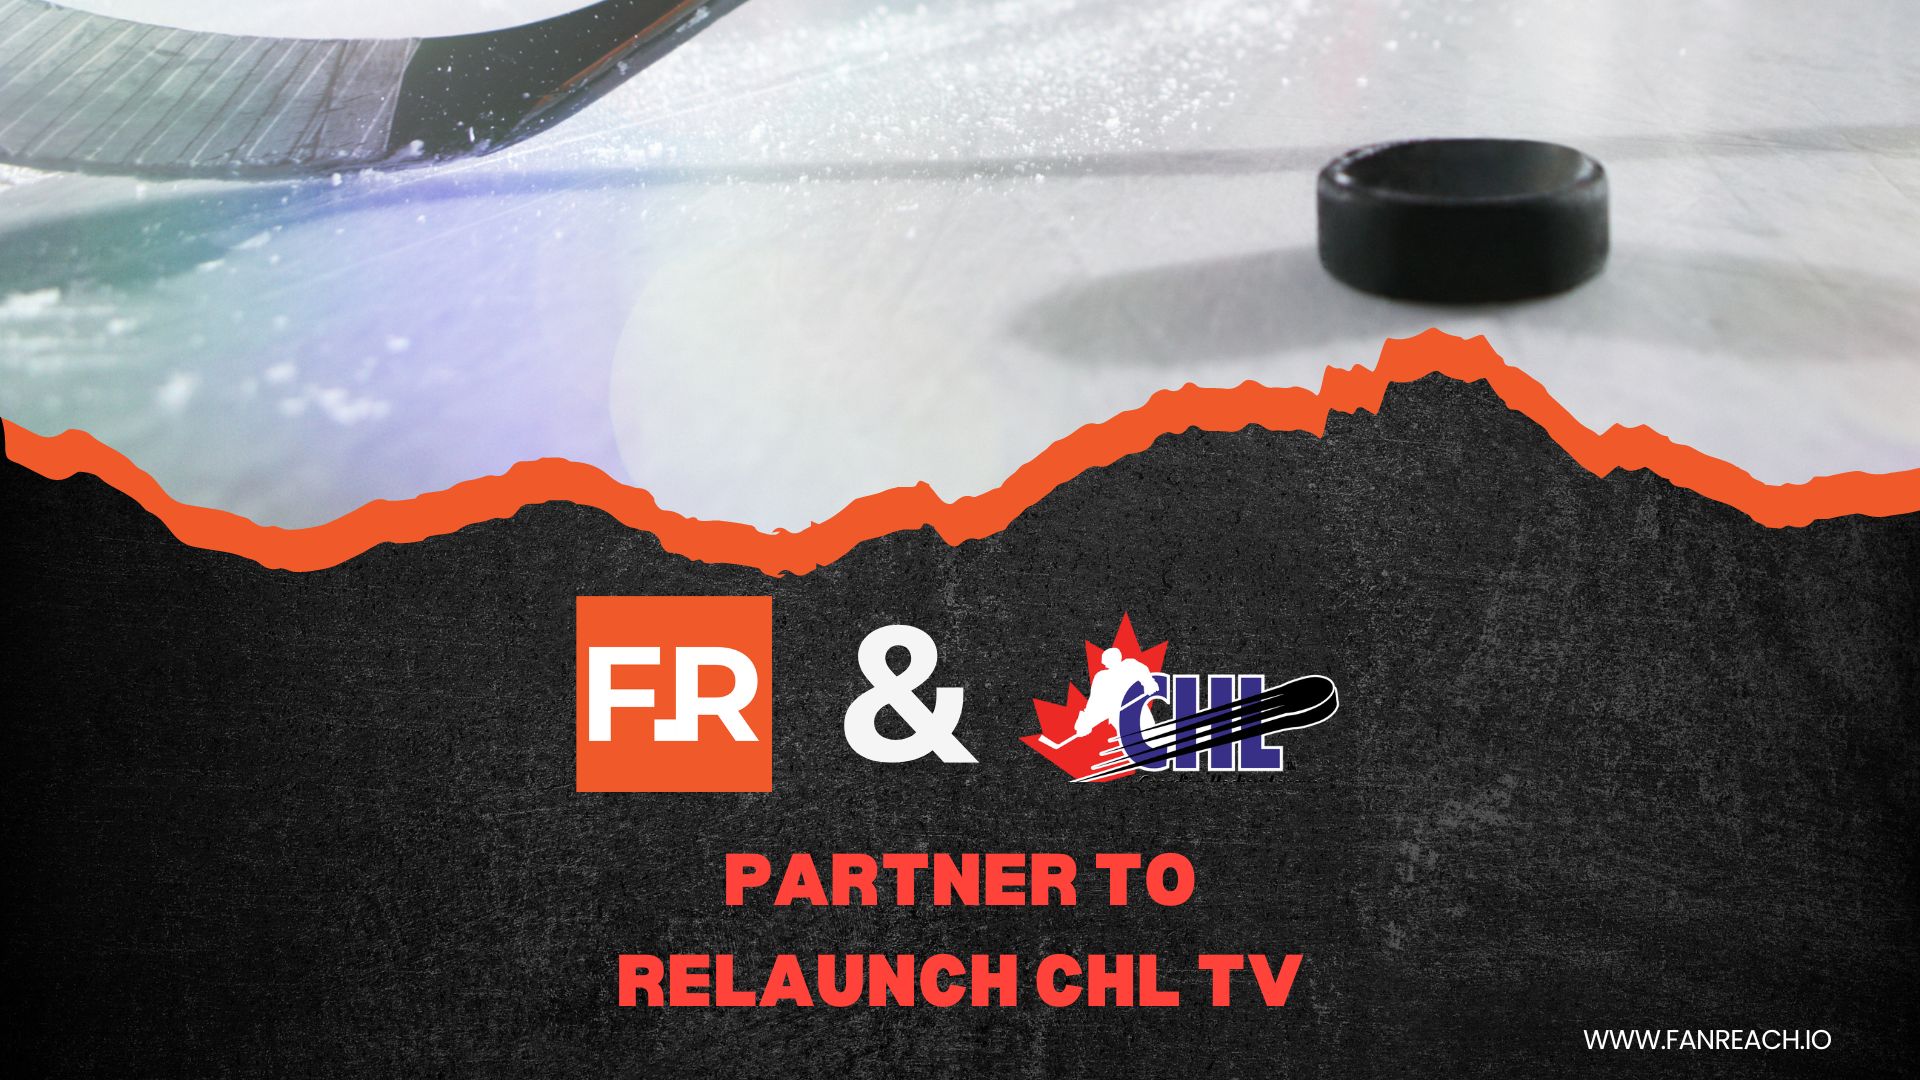 Canadian Hockey League partners with FanReach to relaunch CHL TV